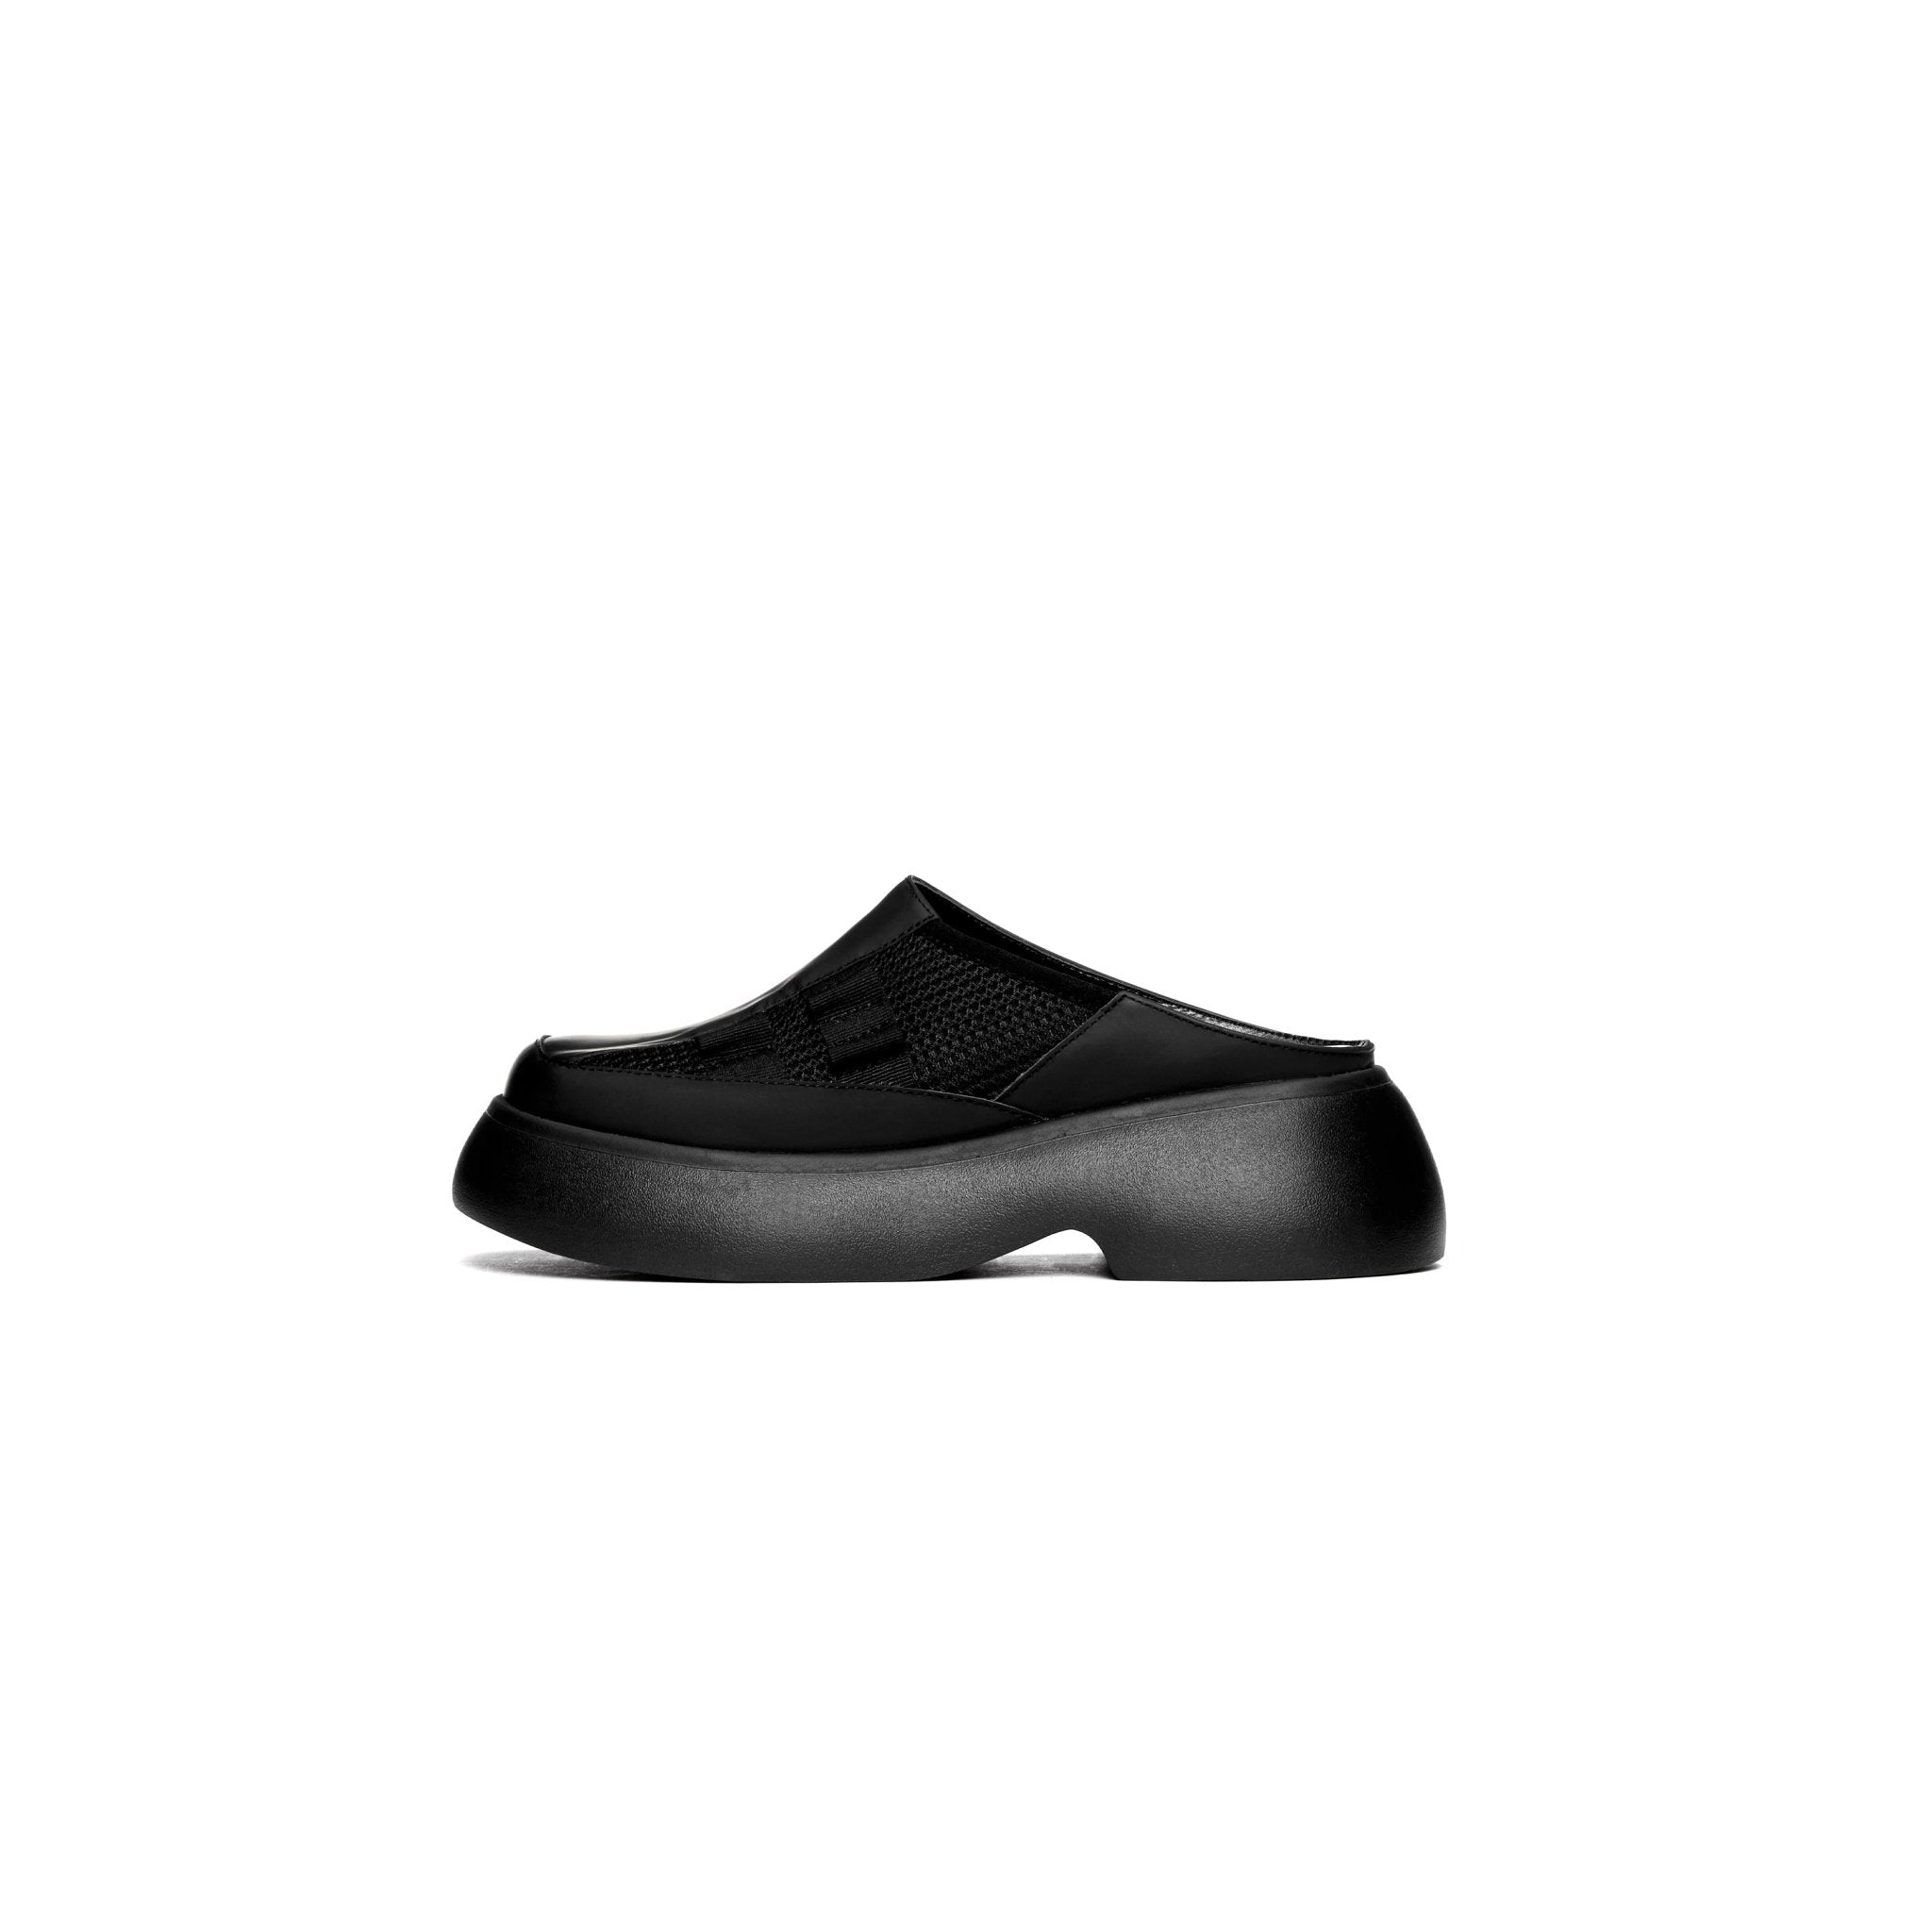 LOST IN ECHO Black Multifunctional Storage Structure Comfortable Slippers | MADA IN CHINA